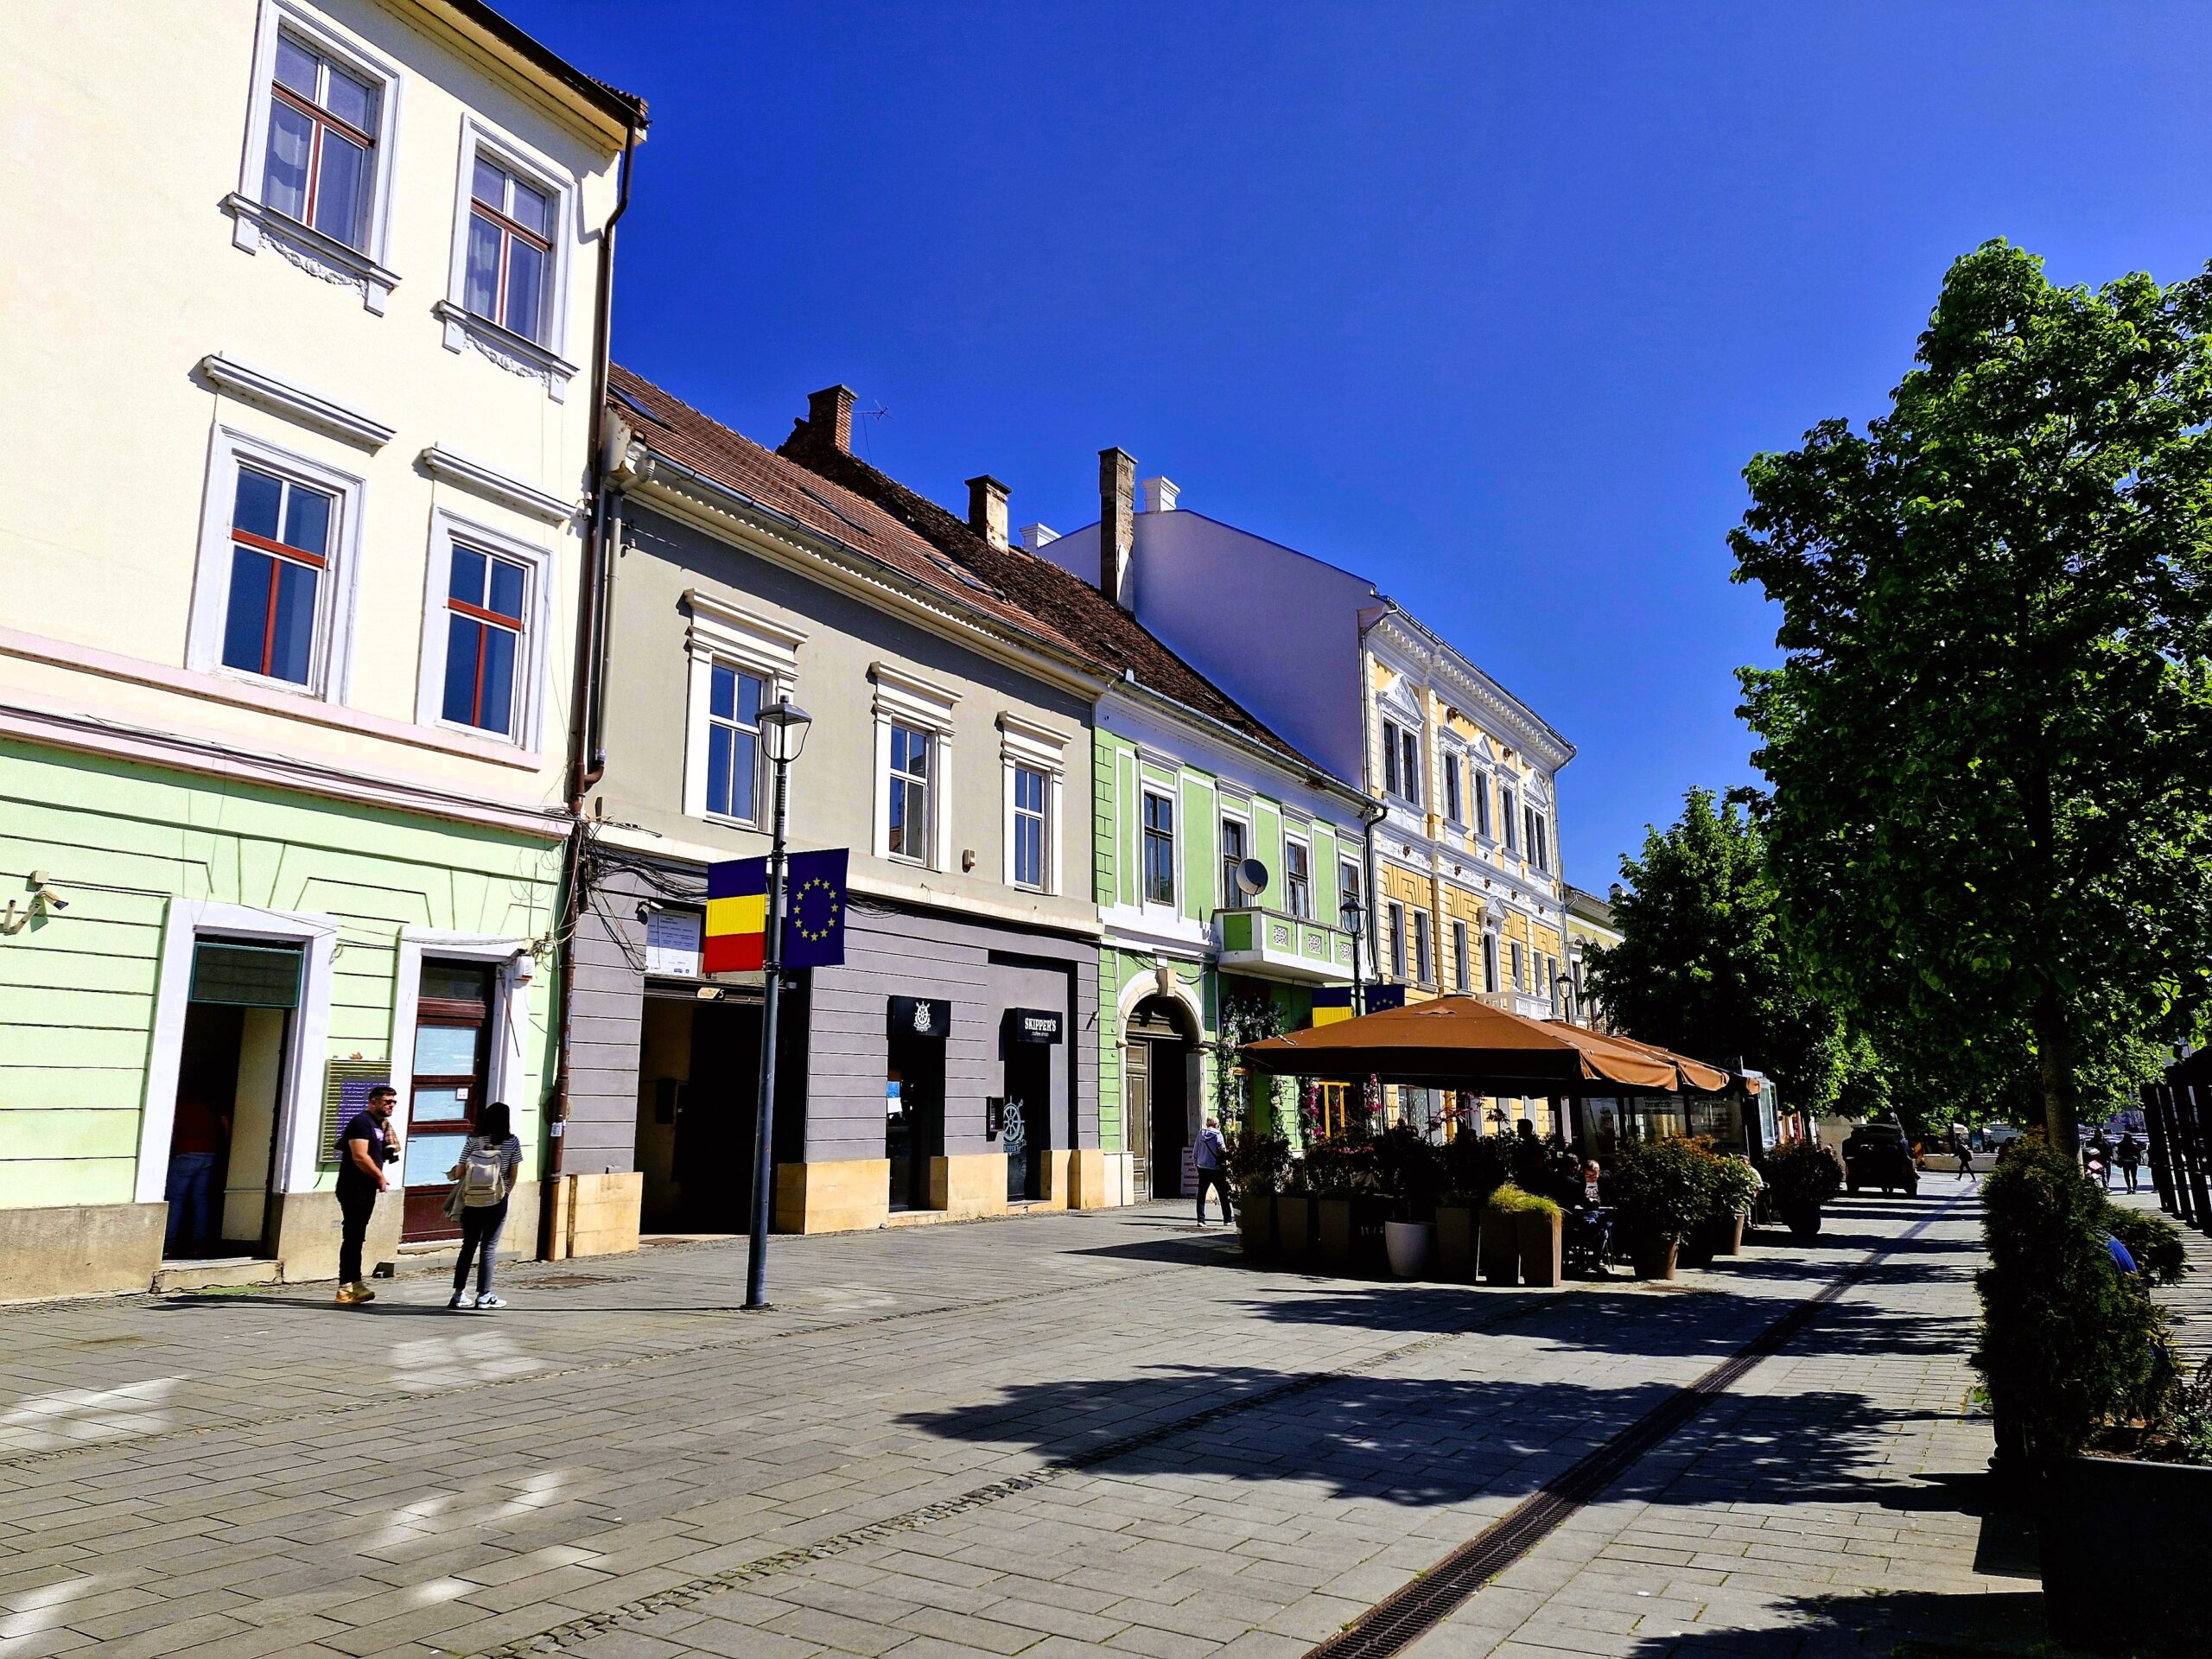 A pretty street scene showing a green, a yellow and a grey building in Cluj-Napoca